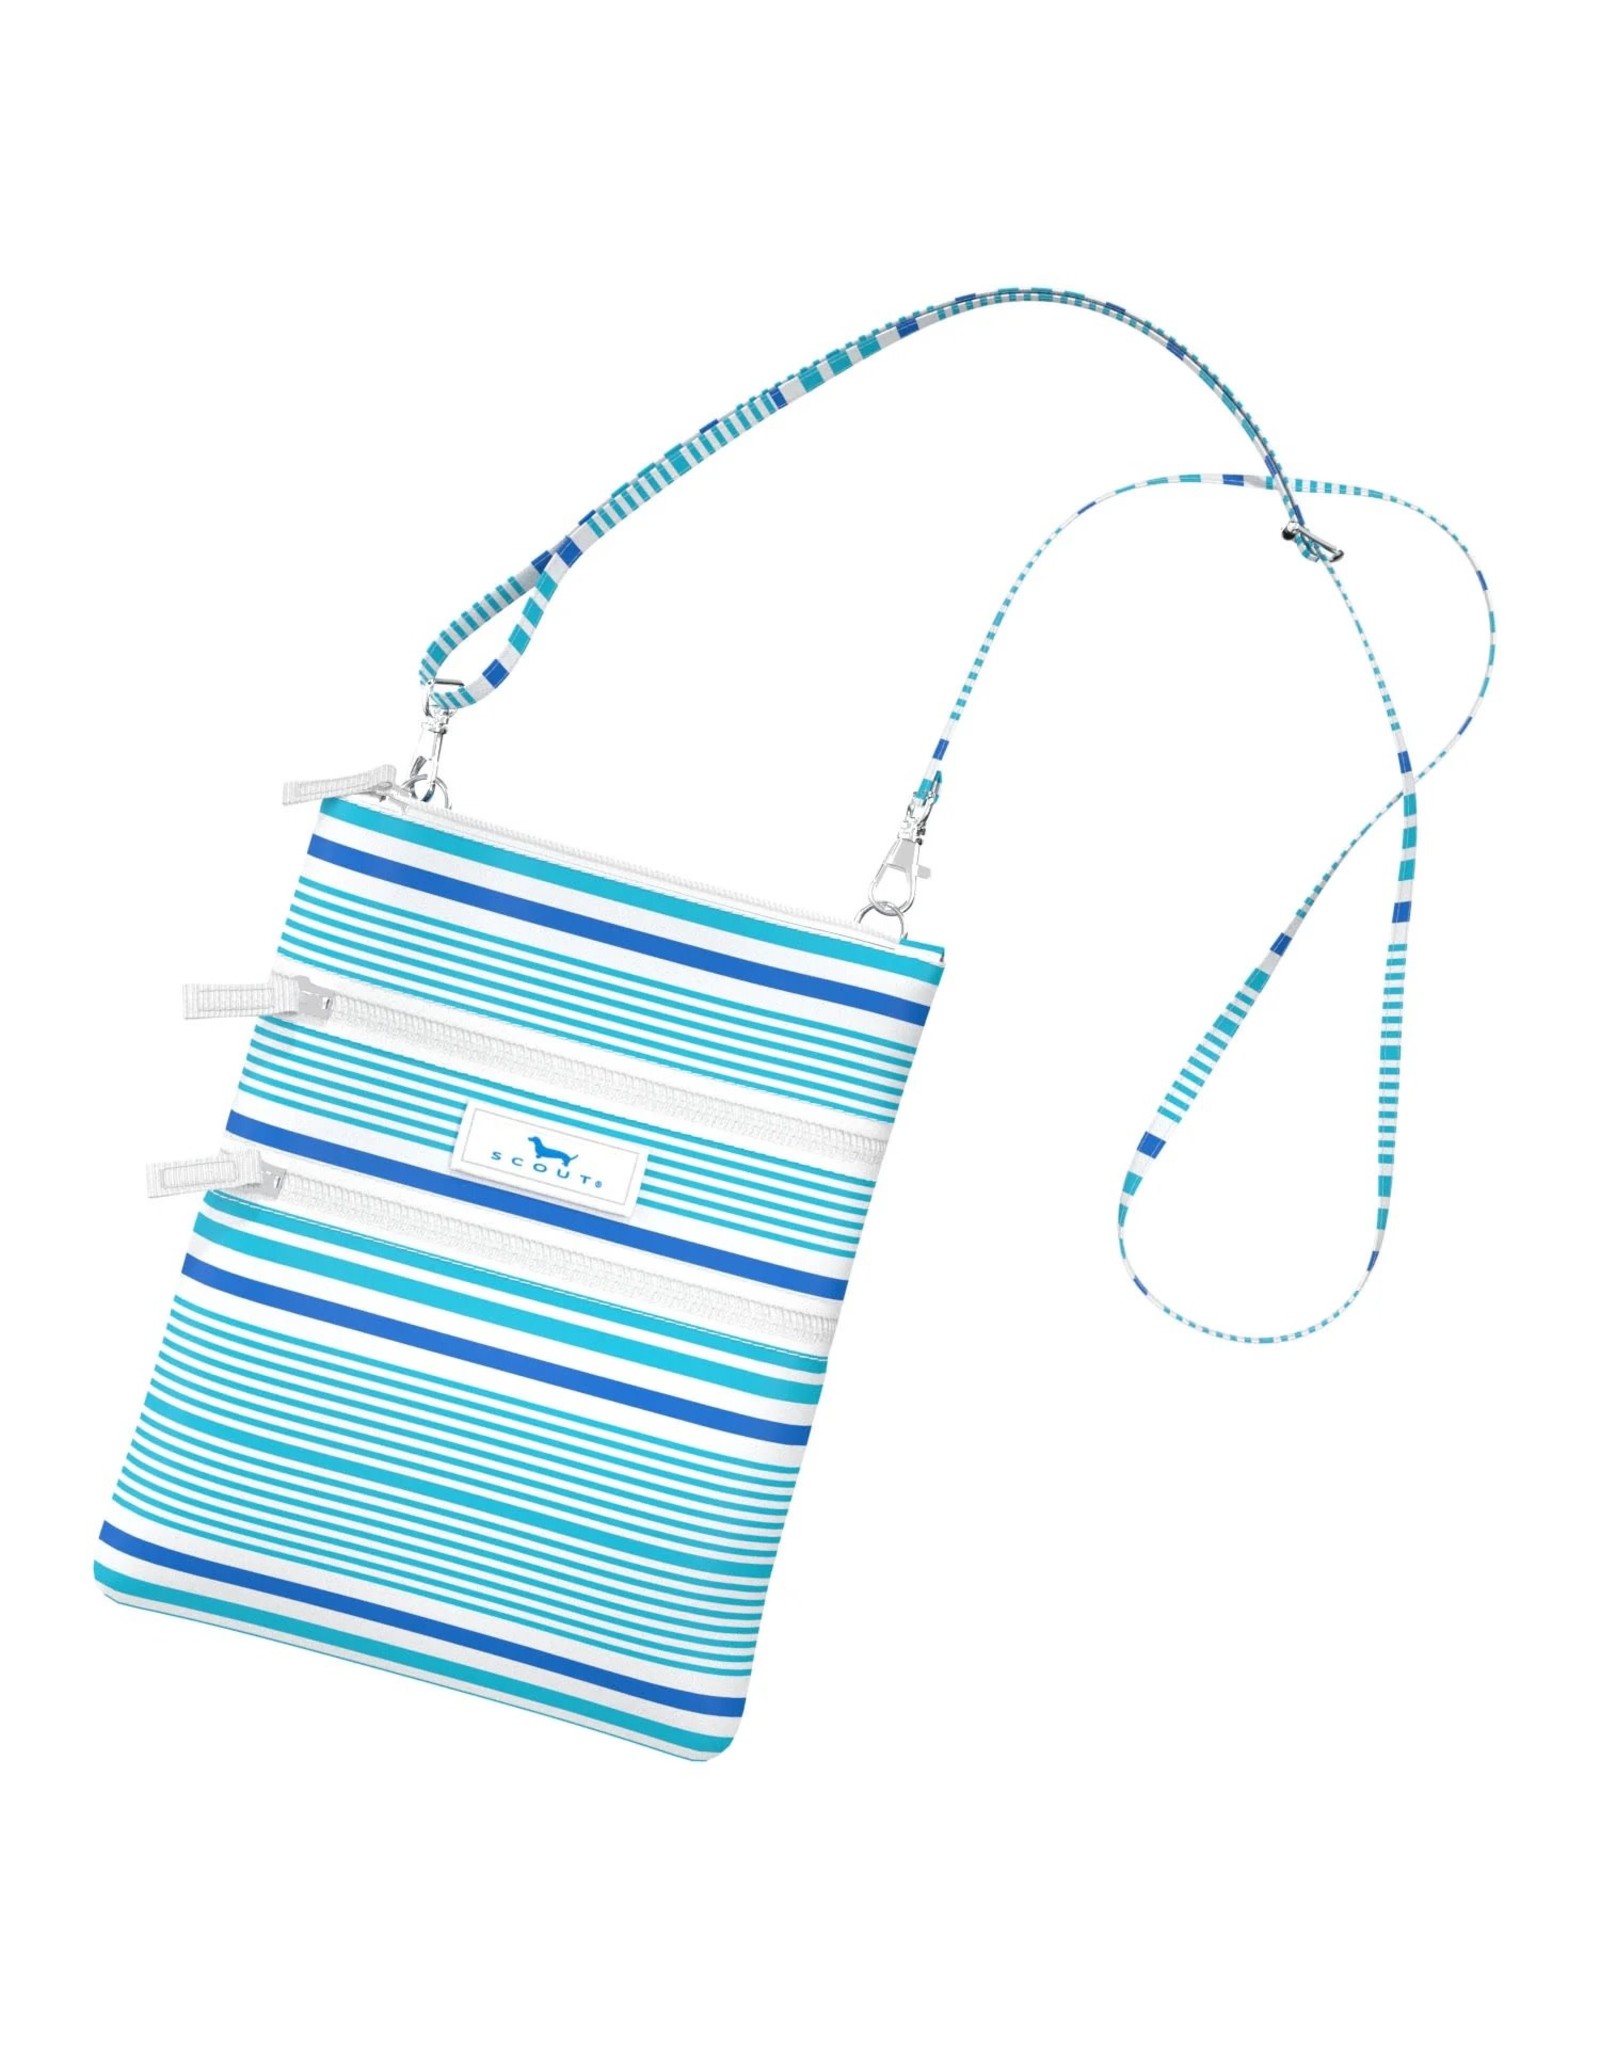 Scout Bags Sally Go Lightly Crossbody Bag Seas The Day